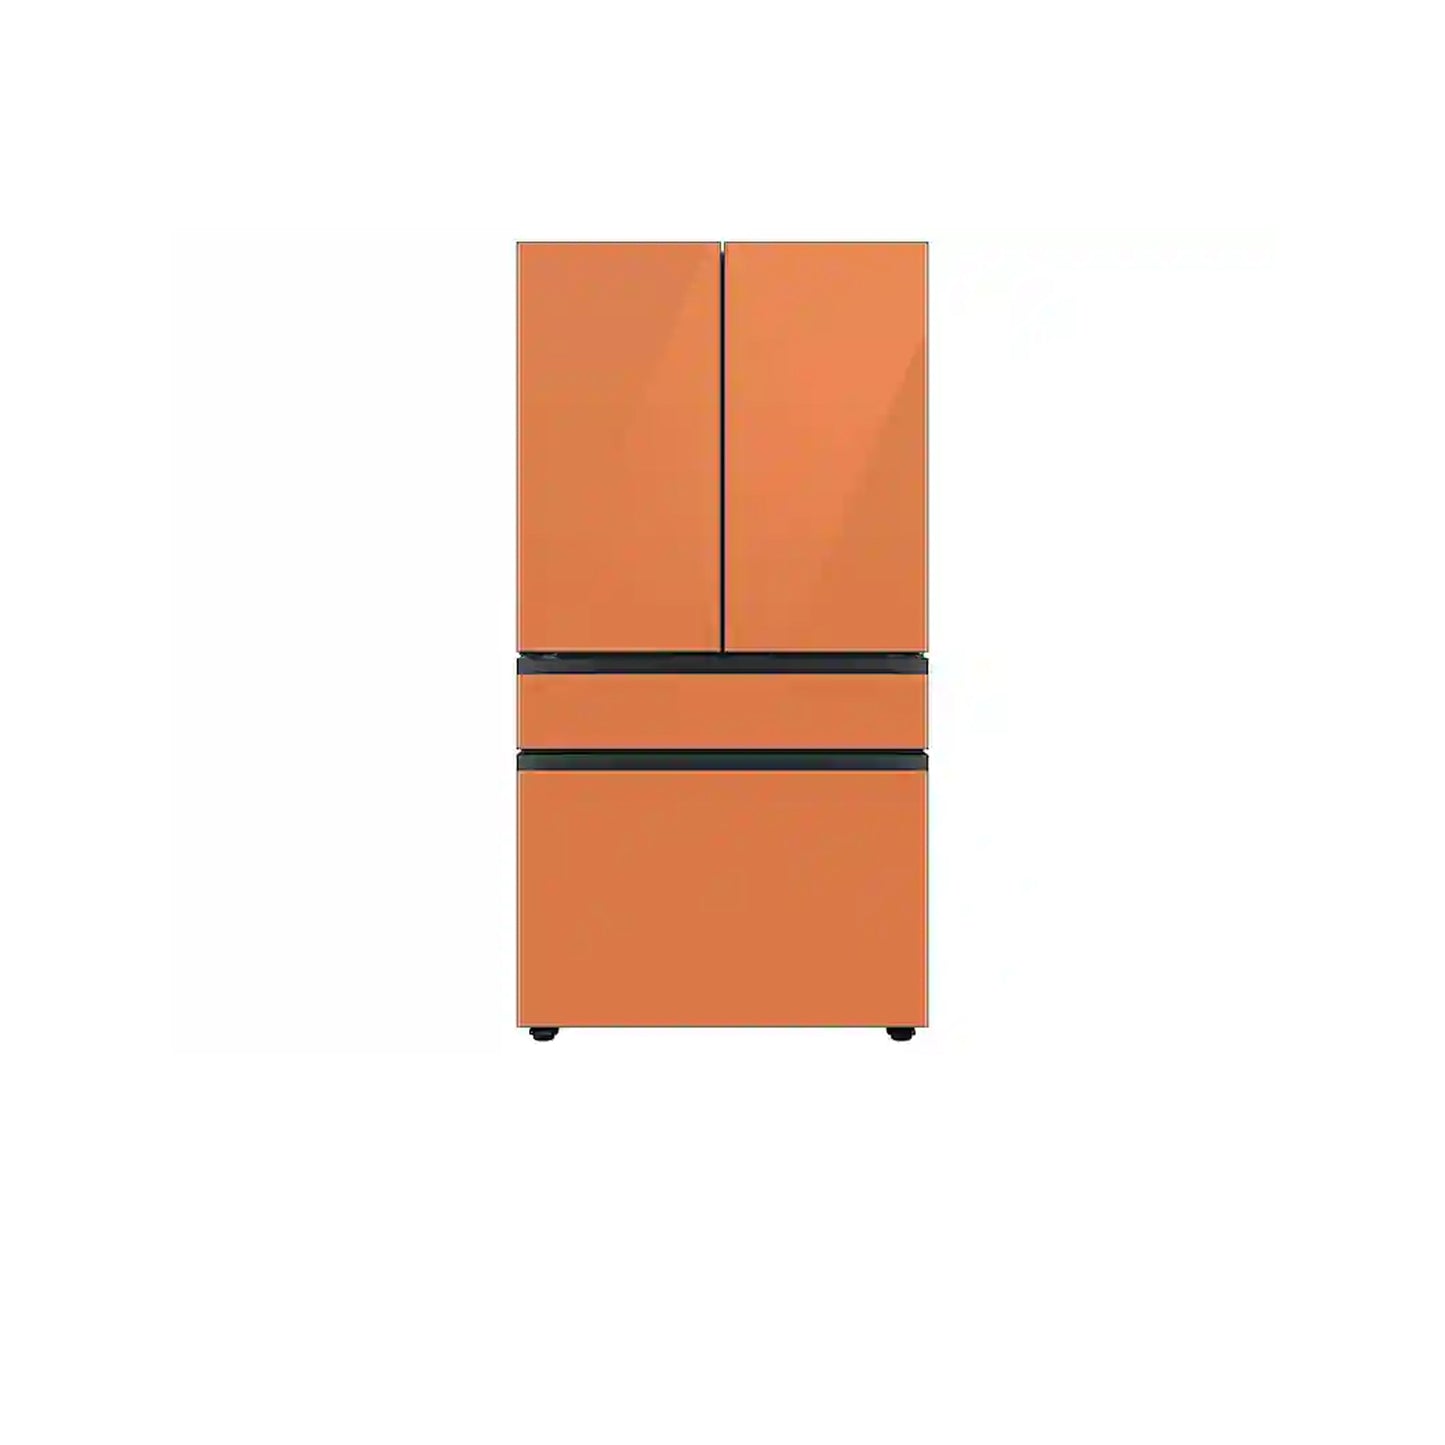 Bespoke 4-Door French Door Refrigerator (29 cu. ft.) with Beverage Center™ in Morning Blue Glass Top Panels and White Glass Middle and Bottom Panels.